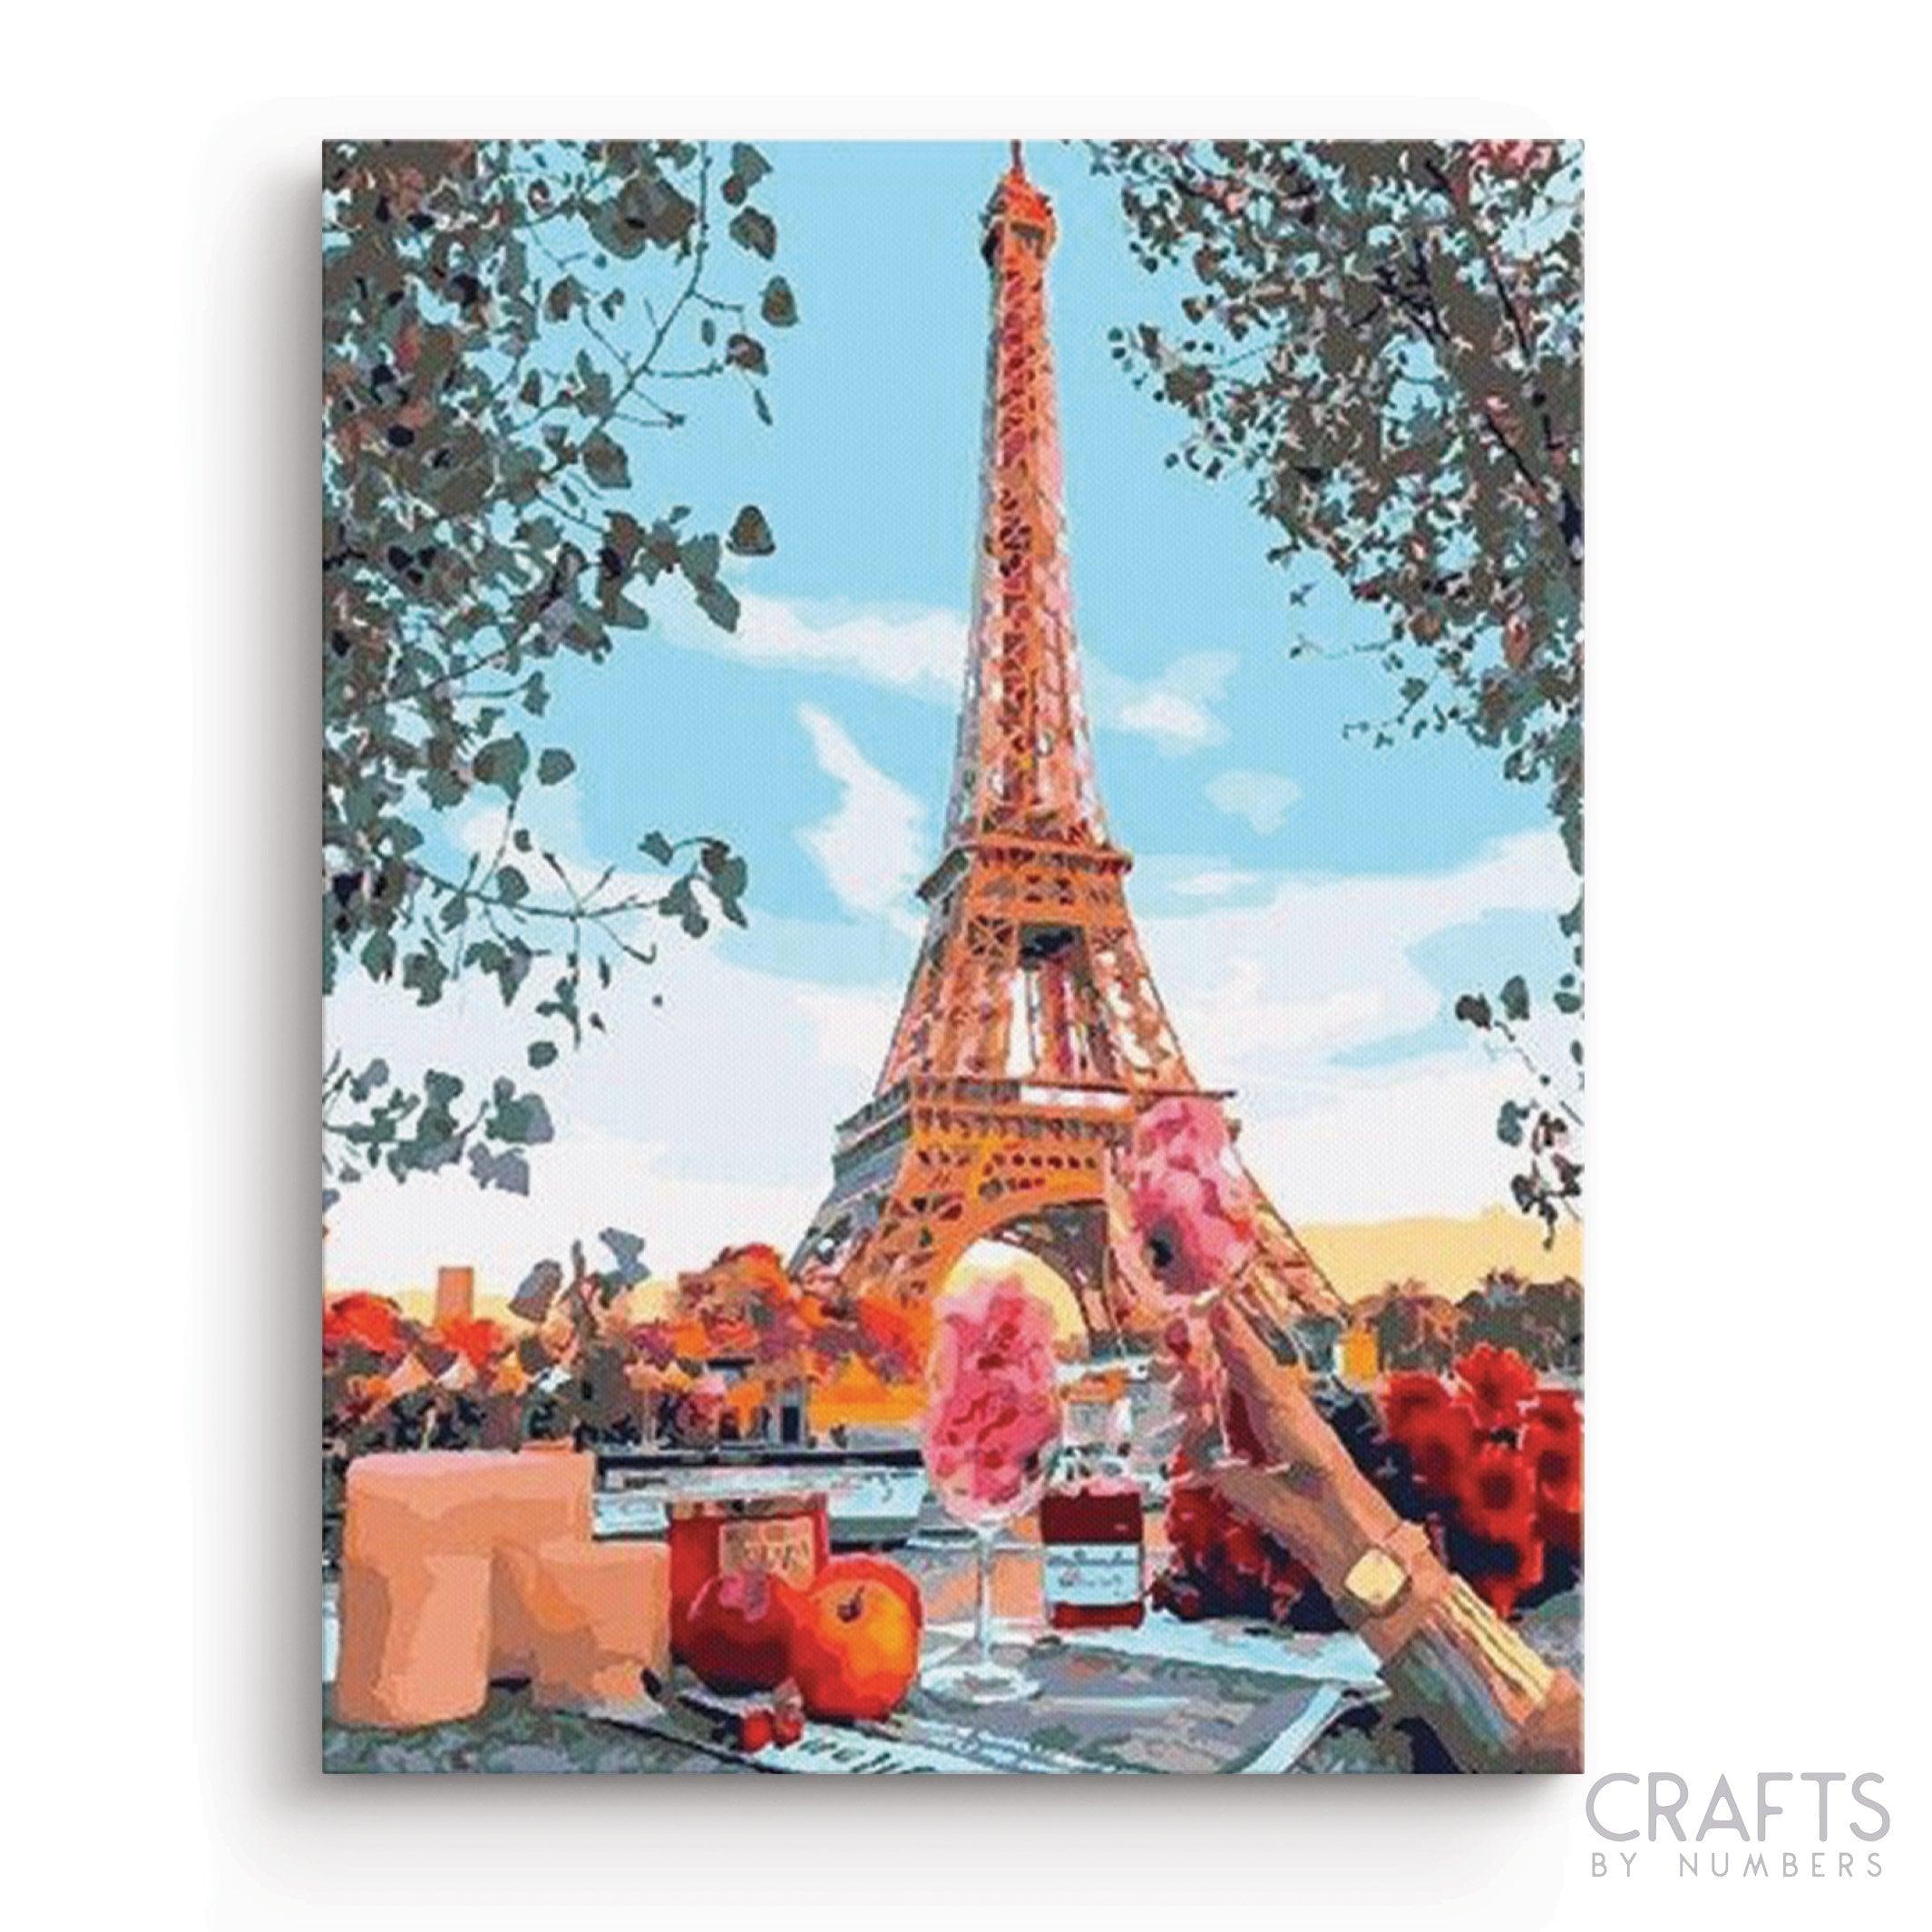 Paint By Number Kit for Adults 16x20 Paris Eiffel Tower - DIY